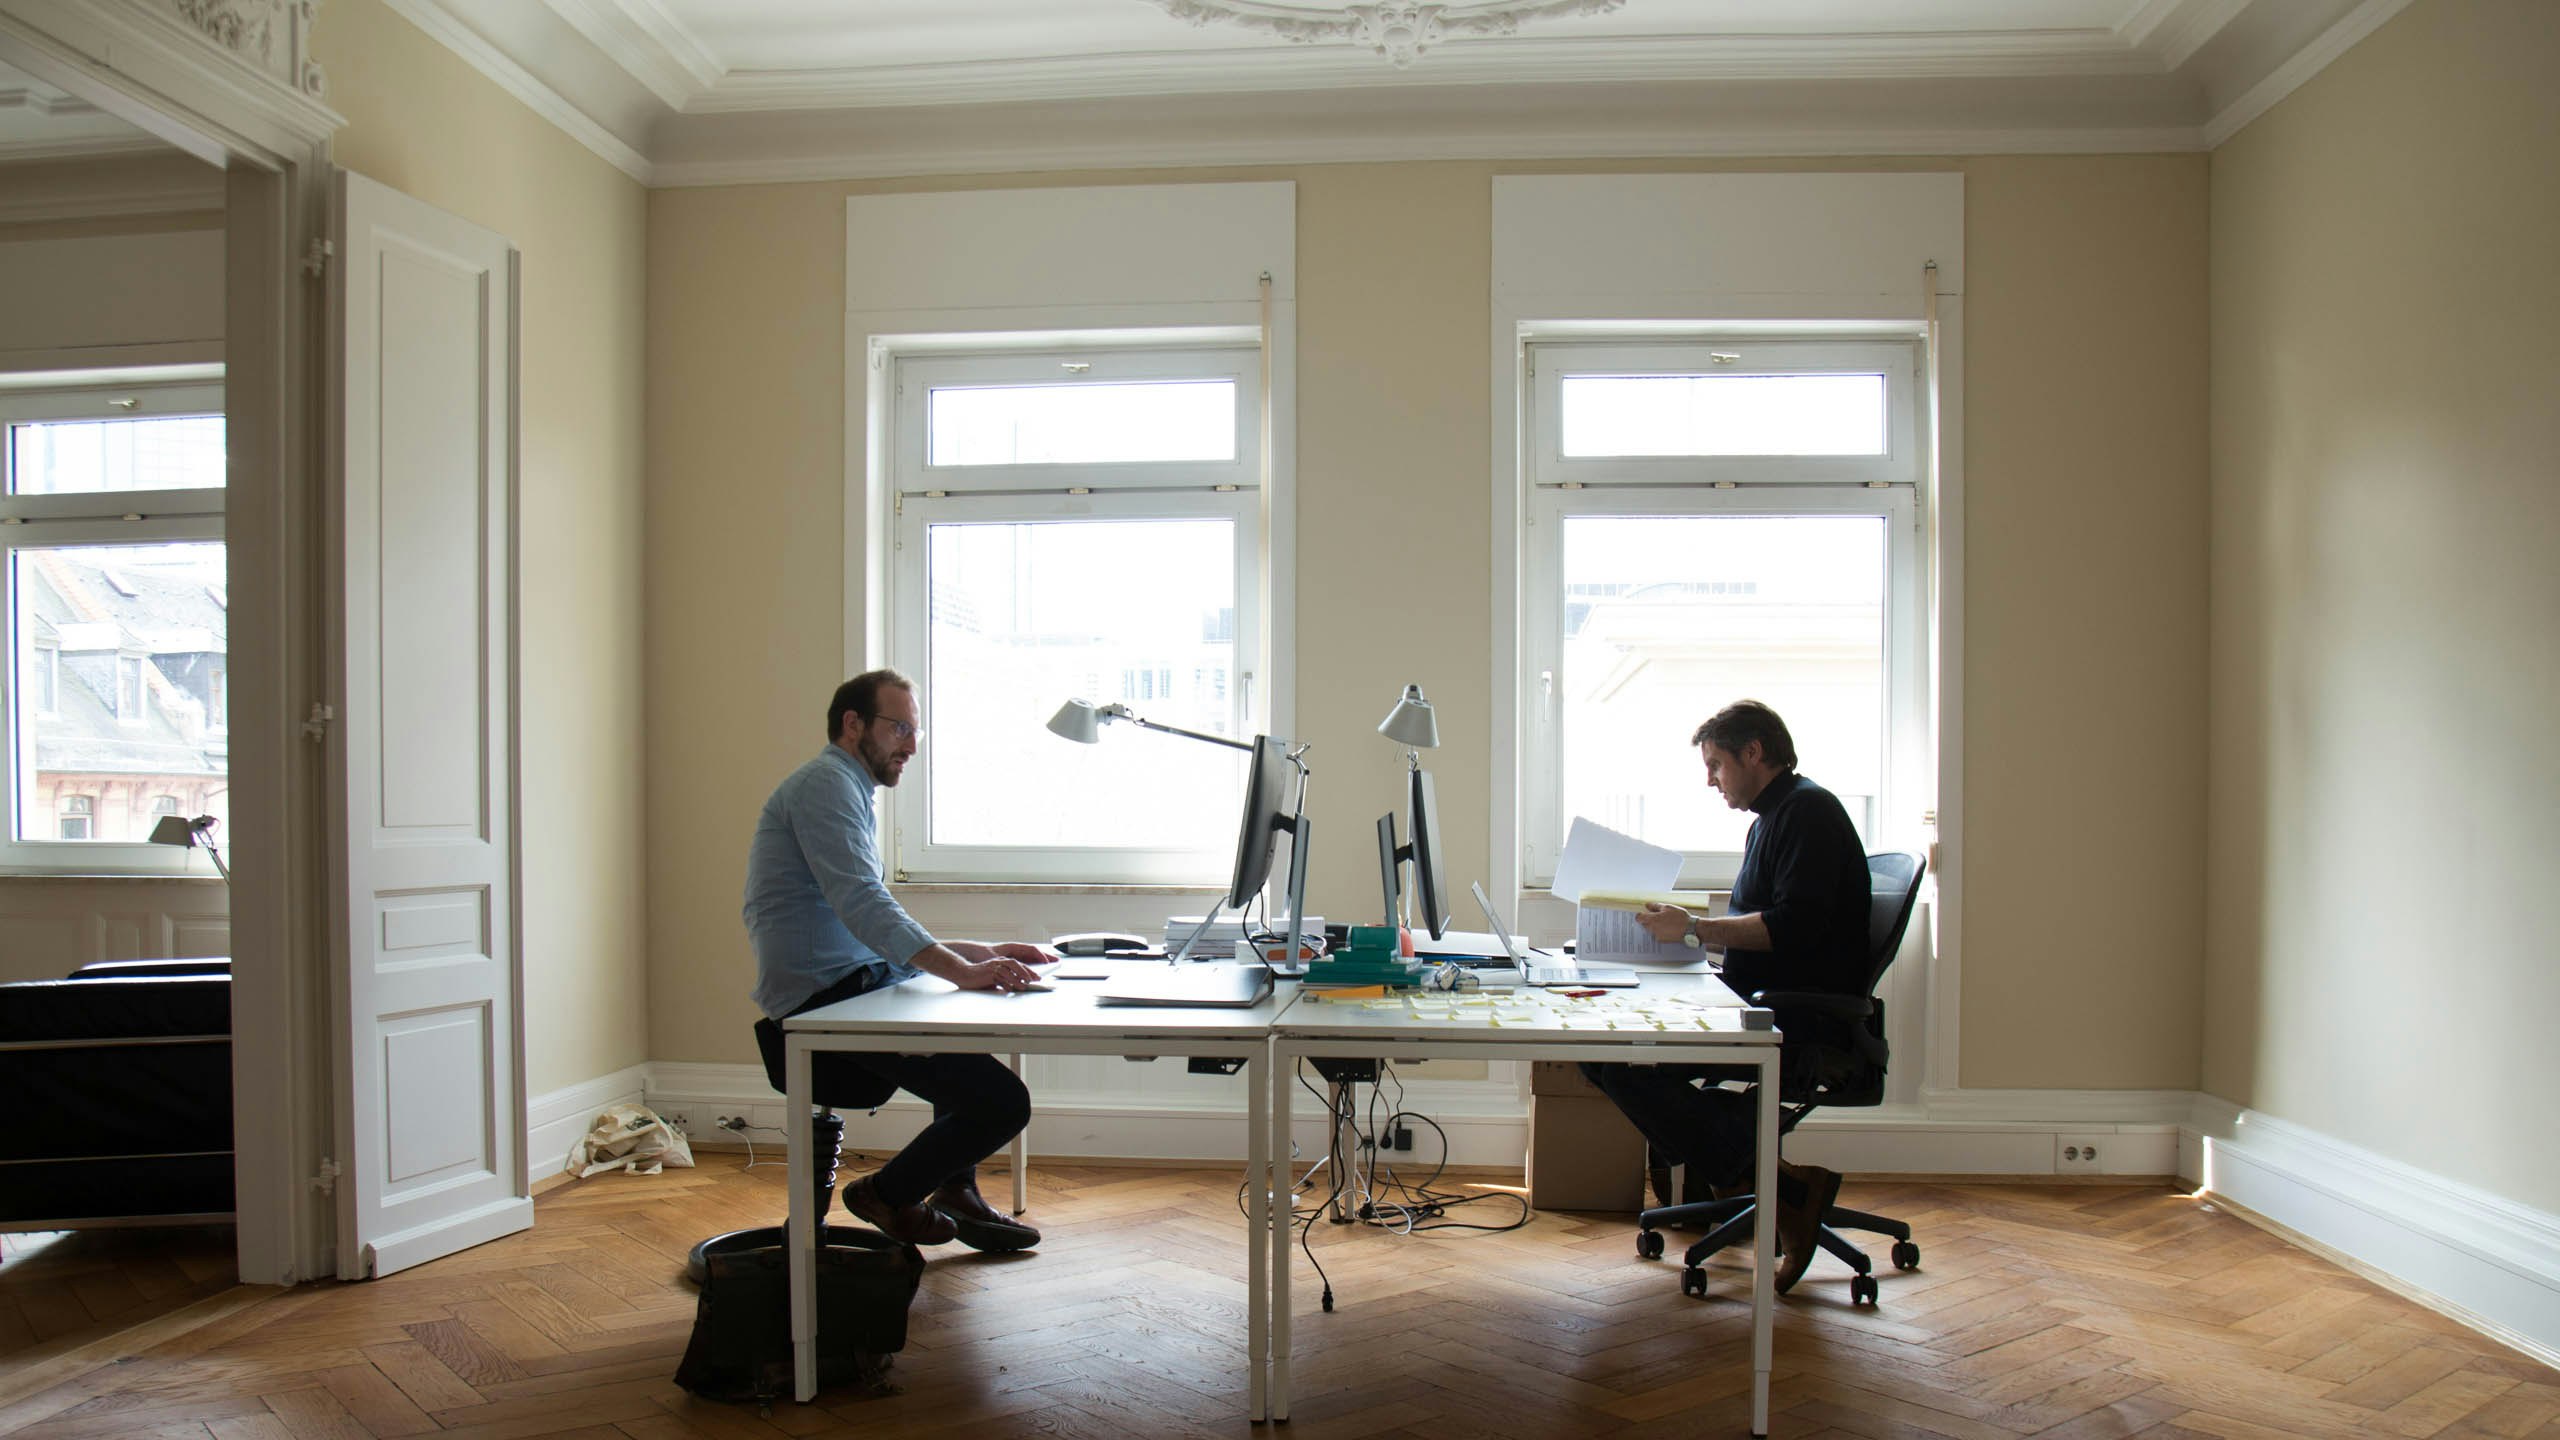 Werner Spengler and Andreas Gutheil siting behind their workdesk in their office with light walls with windows.